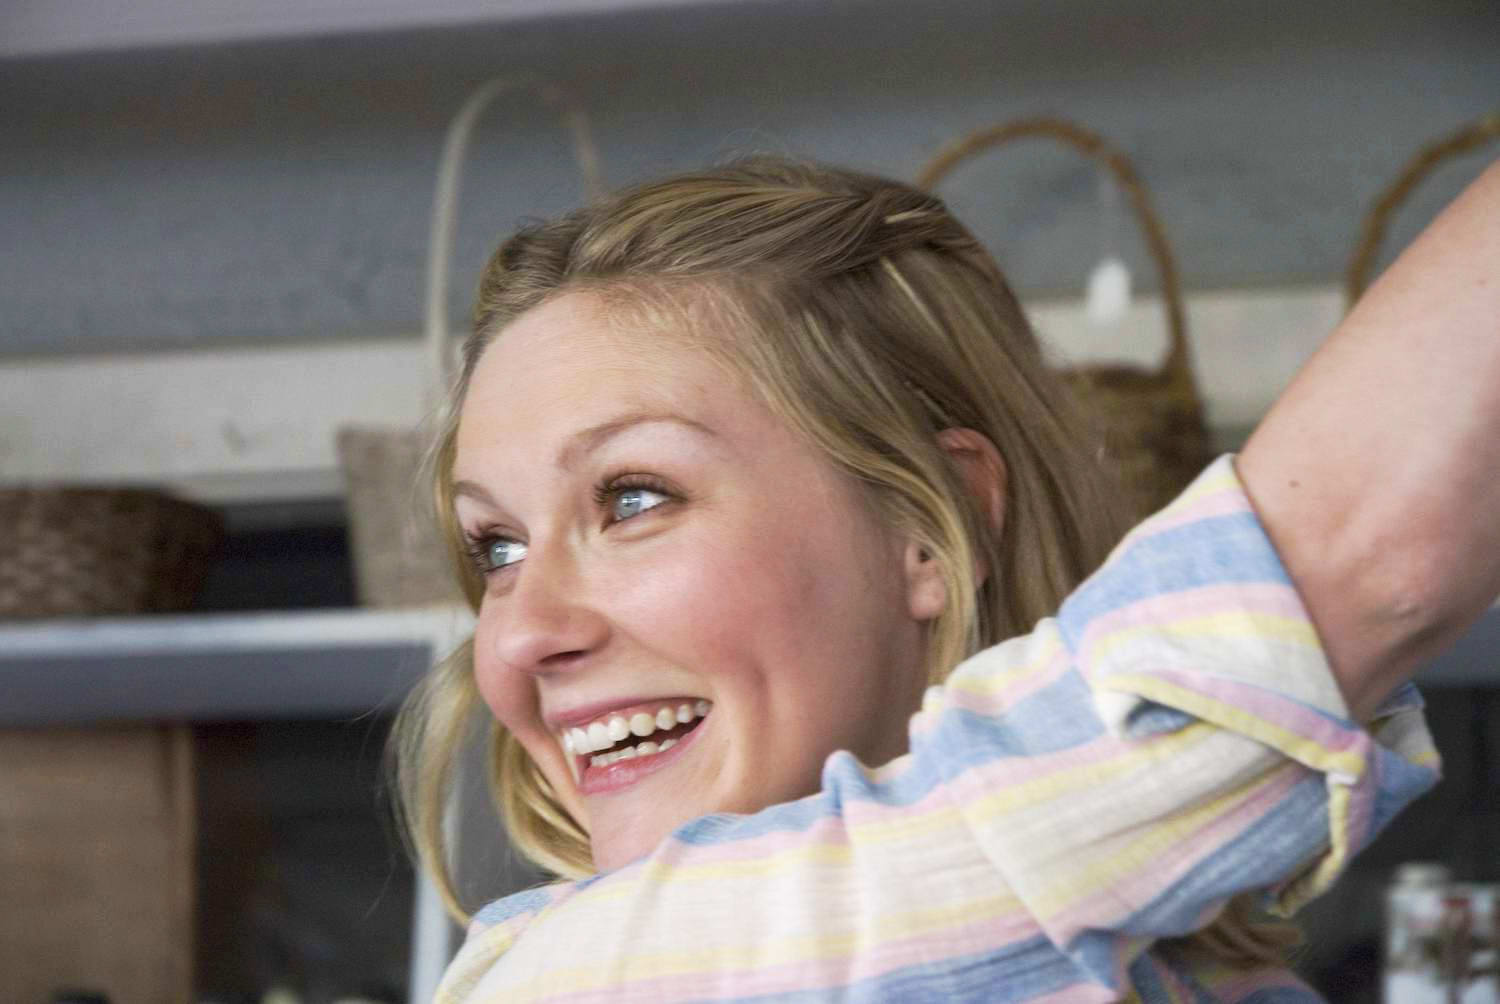 Kirsten Dunst stars as Katie McCarthy in Magnolia Pictures' All Good Things (2010)